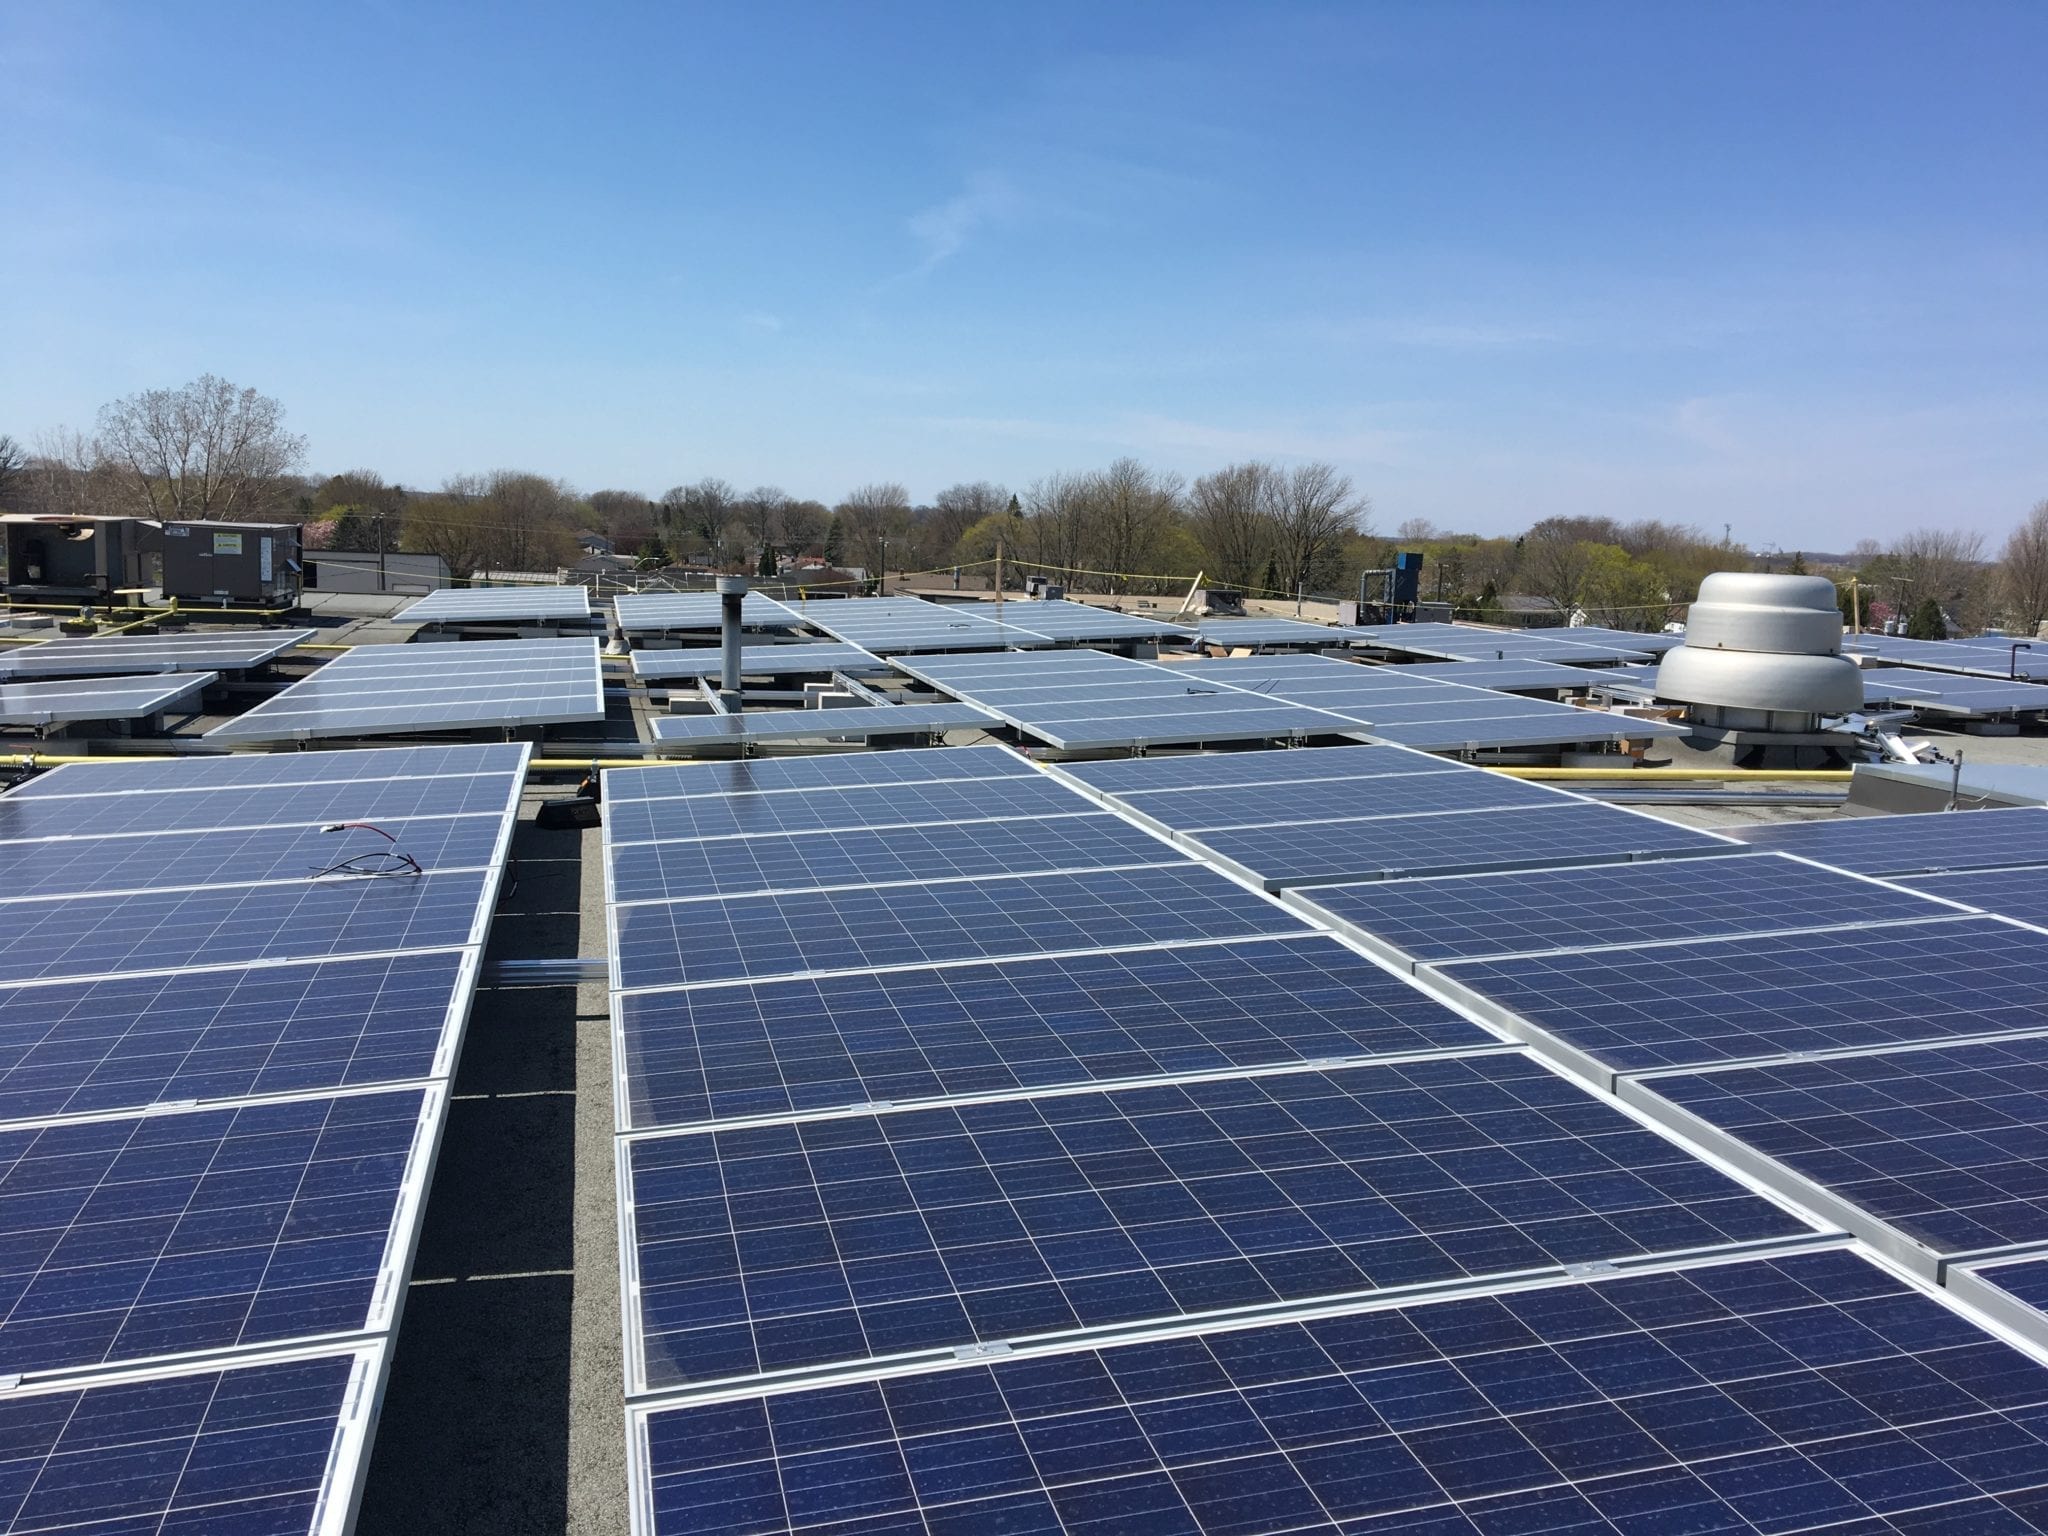 Rooftop Solar Panel System - Skyline Clean Energy Fund